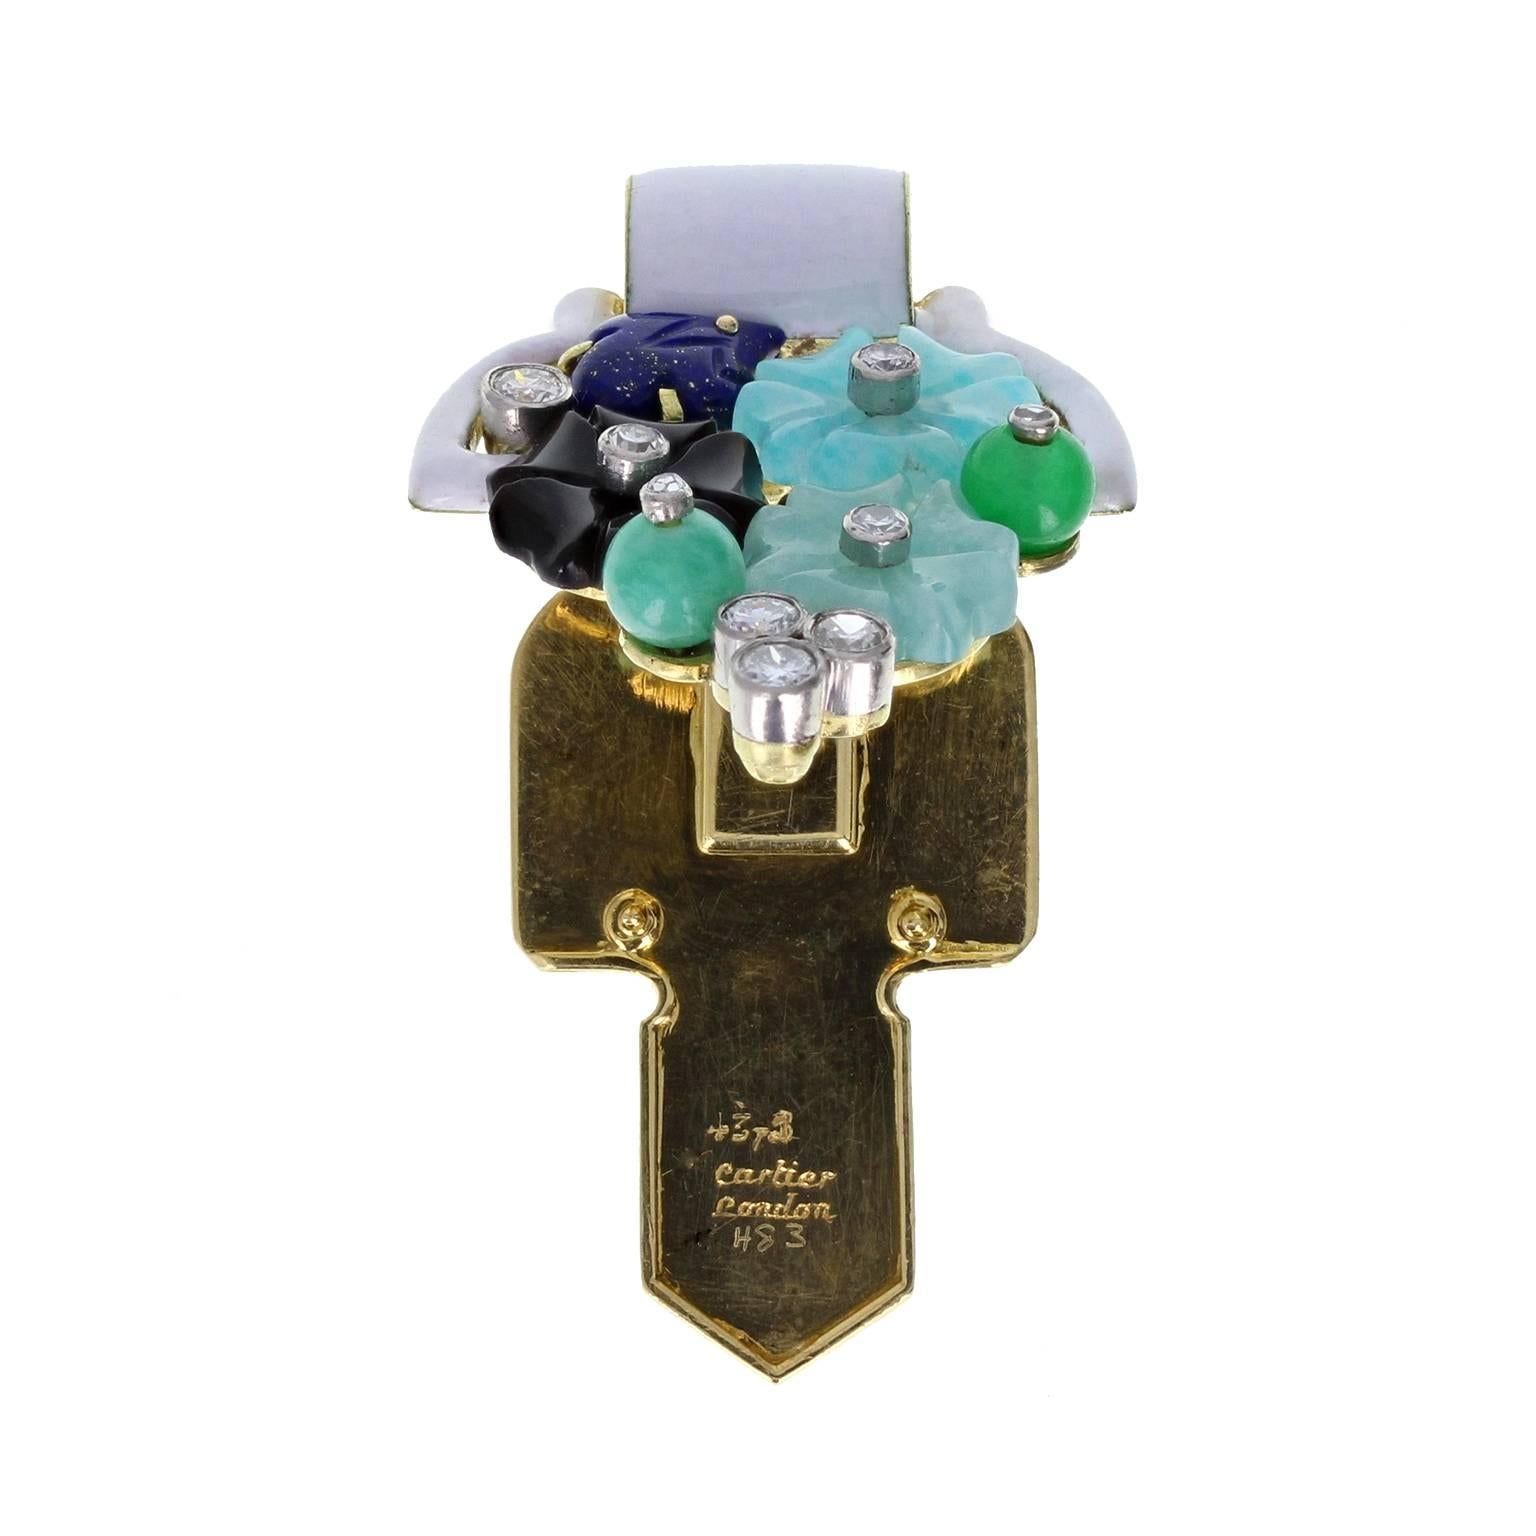 A fine example of the famed Cartier Tutti Frutti jewellery. In excellent condition, this clip is adorned with carved jade, emerald, lapis lazuli, black onyx and enamel in a floral pattern, accented with round cut diamonds. Signed 'Cartier London'.